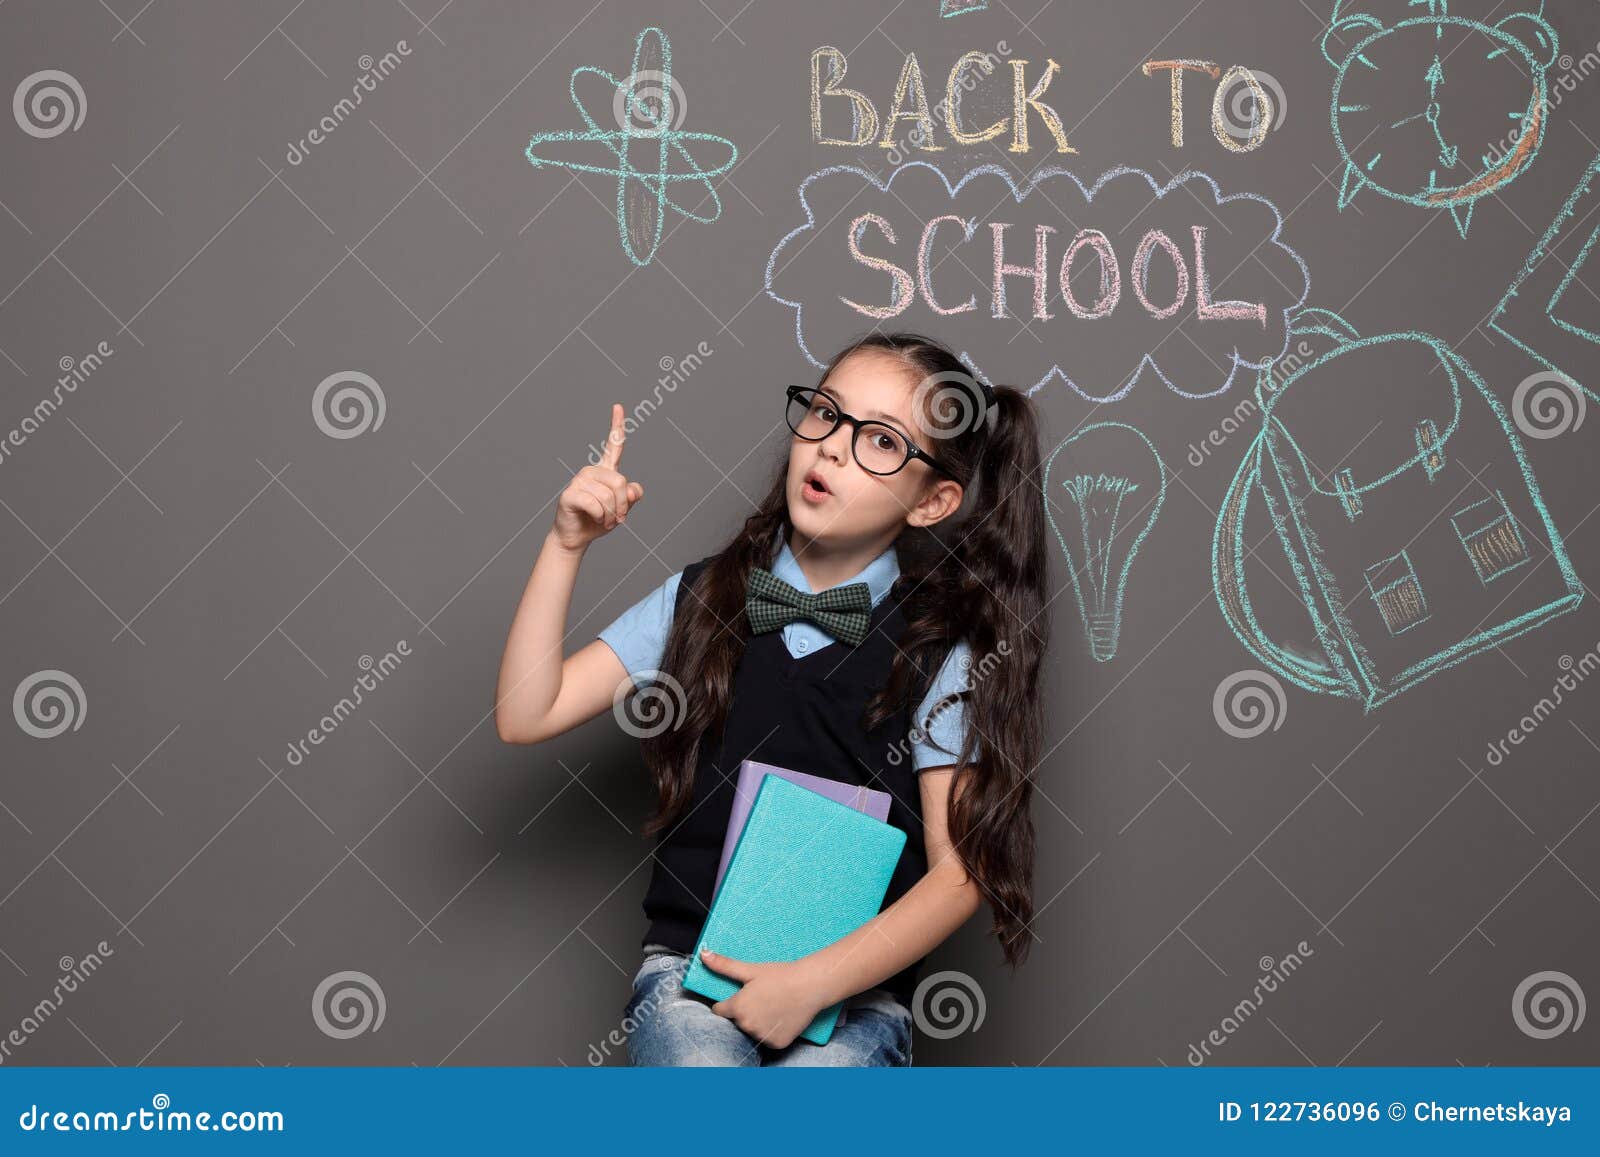 little child in uniform near drawings with text back to school